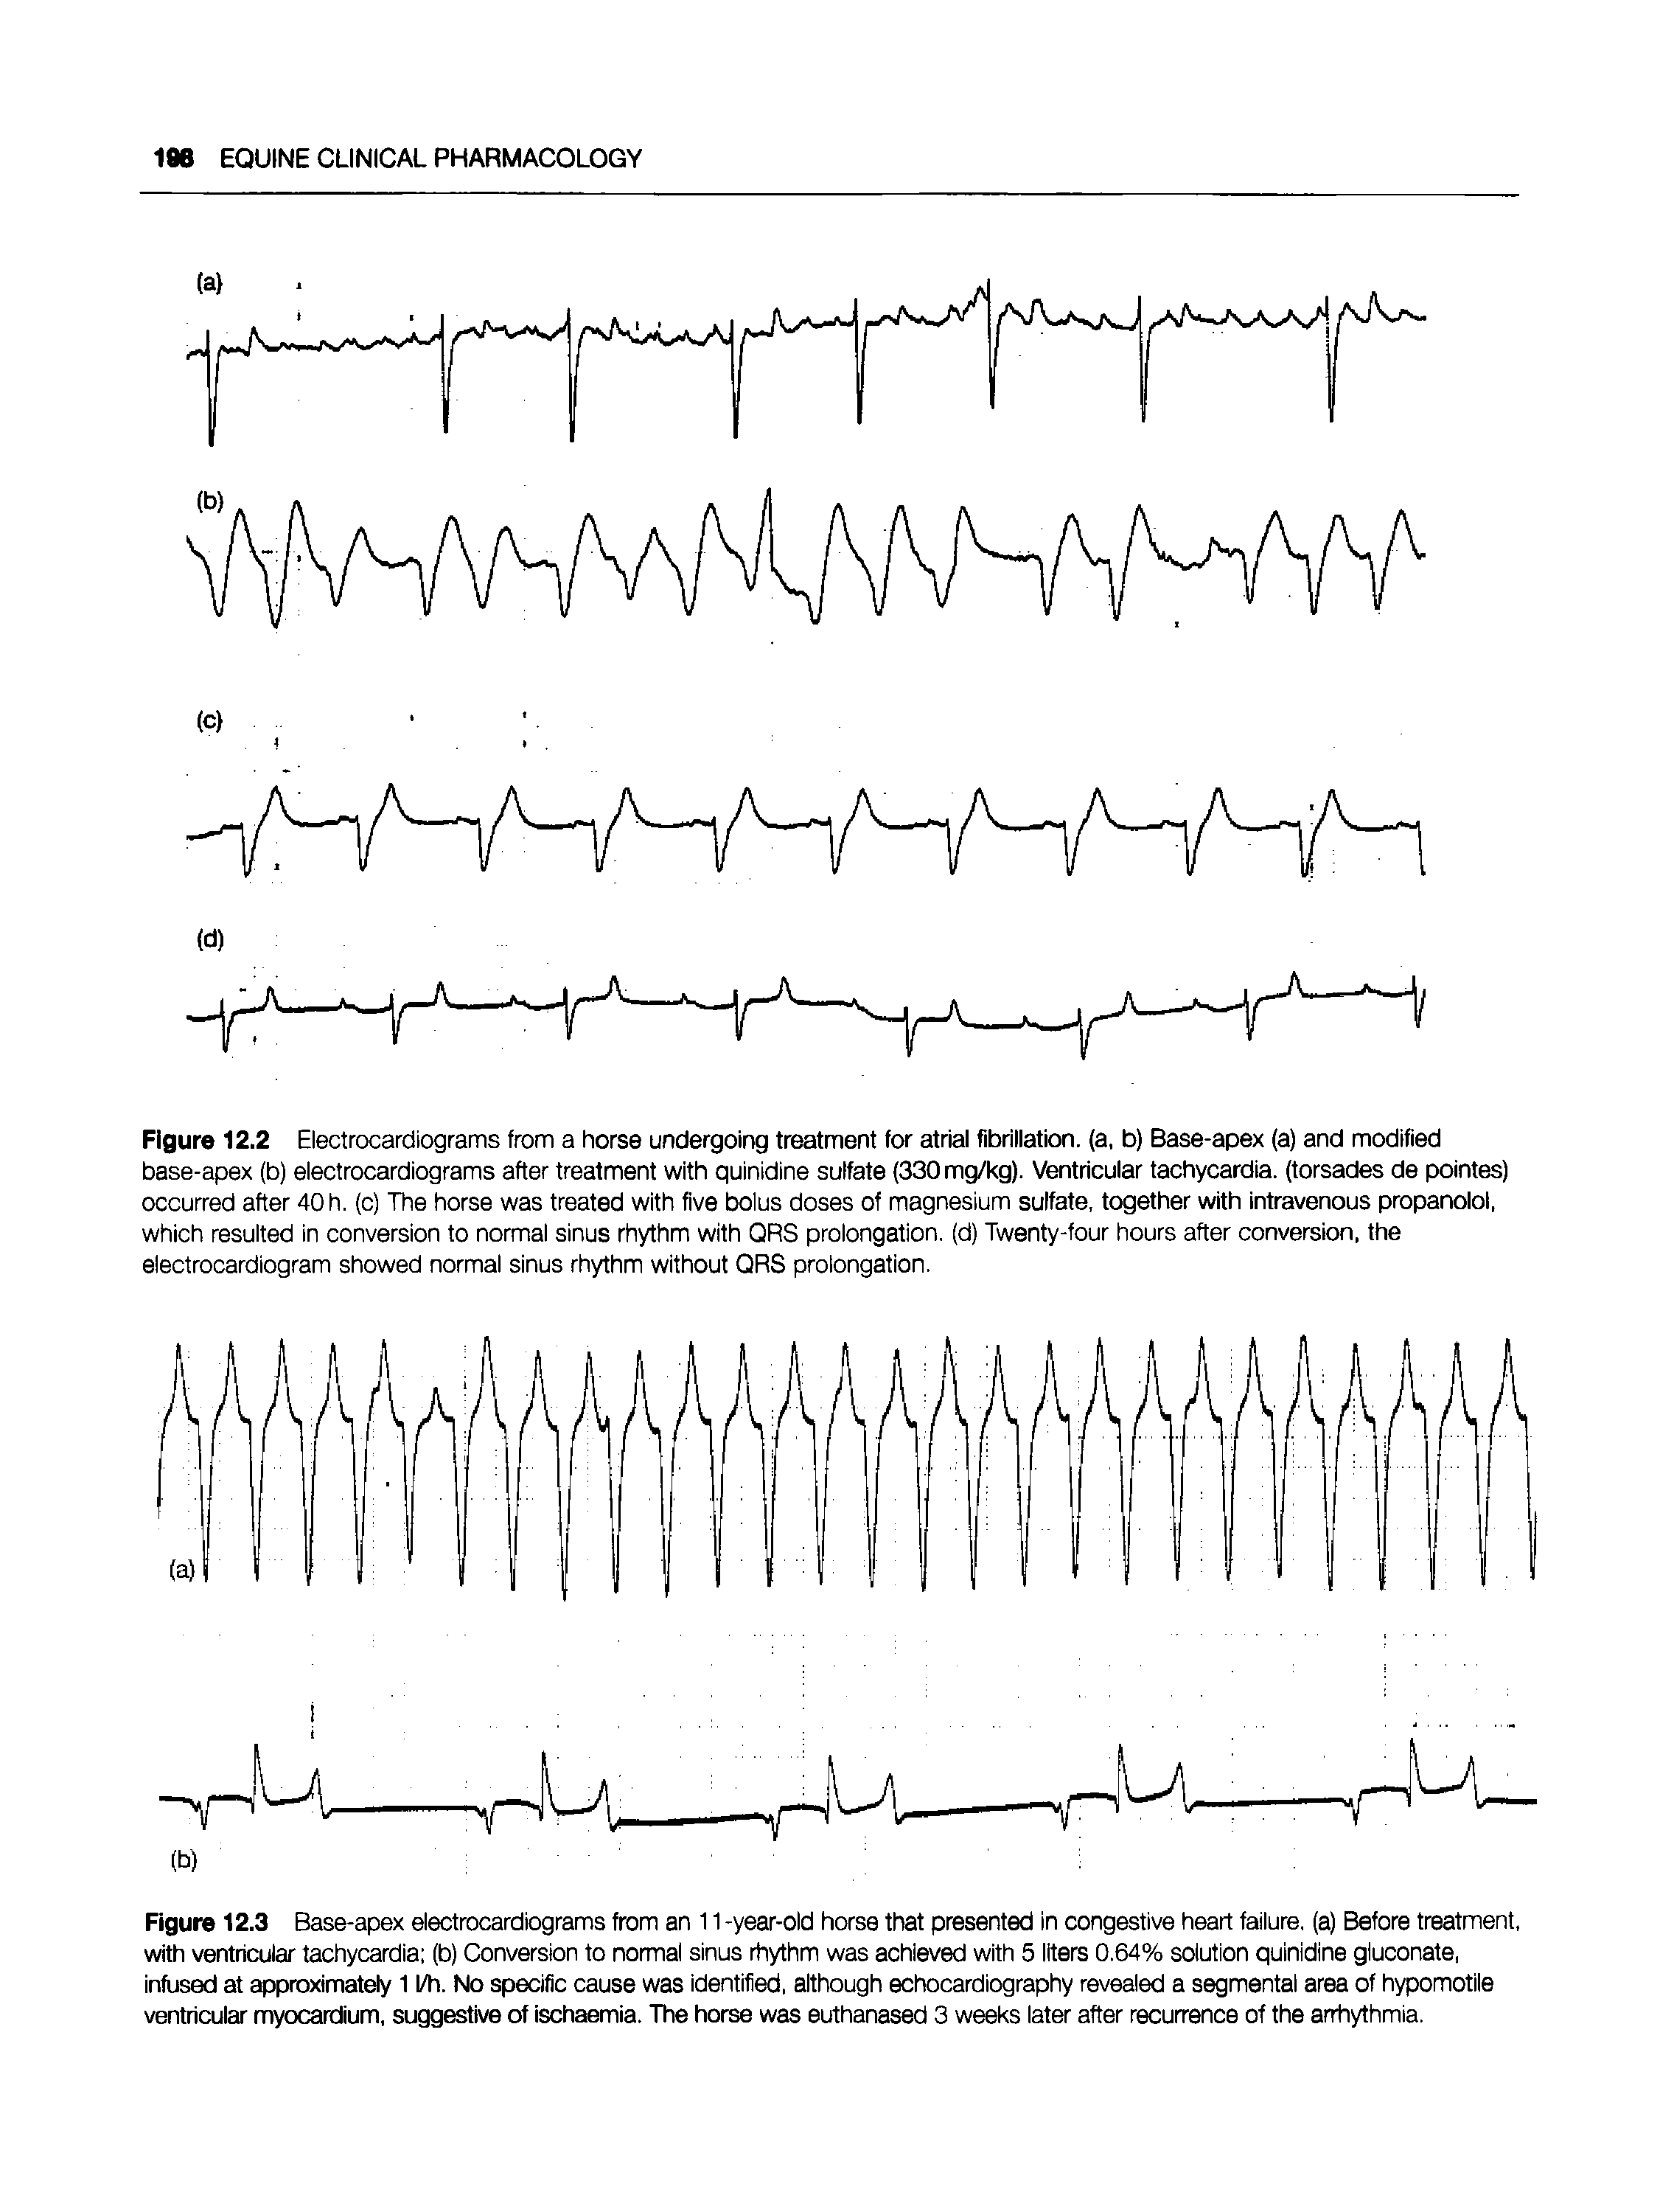 Figure 12.2 Electrocardiograms from a horse undergoing treatment for atrial fibrillation, (a, b) Base-apex (a) and modified base-apex (b) electrocardiograms after treatment with quinidine sulfate (330mg/kg). Ventricular tachycardia, (torsades de pointes) occurred after 40 h. (c) The horse was treated with five bolus doses of magnesium sulfate, together with intravenous propanoloi, which resulted in conversion to normal sinus rhythm with QRS prolongation, (d) Twenty-four hours after conversion, the electrocardiogram showed normal sinus rhythm without QRS prolongation.